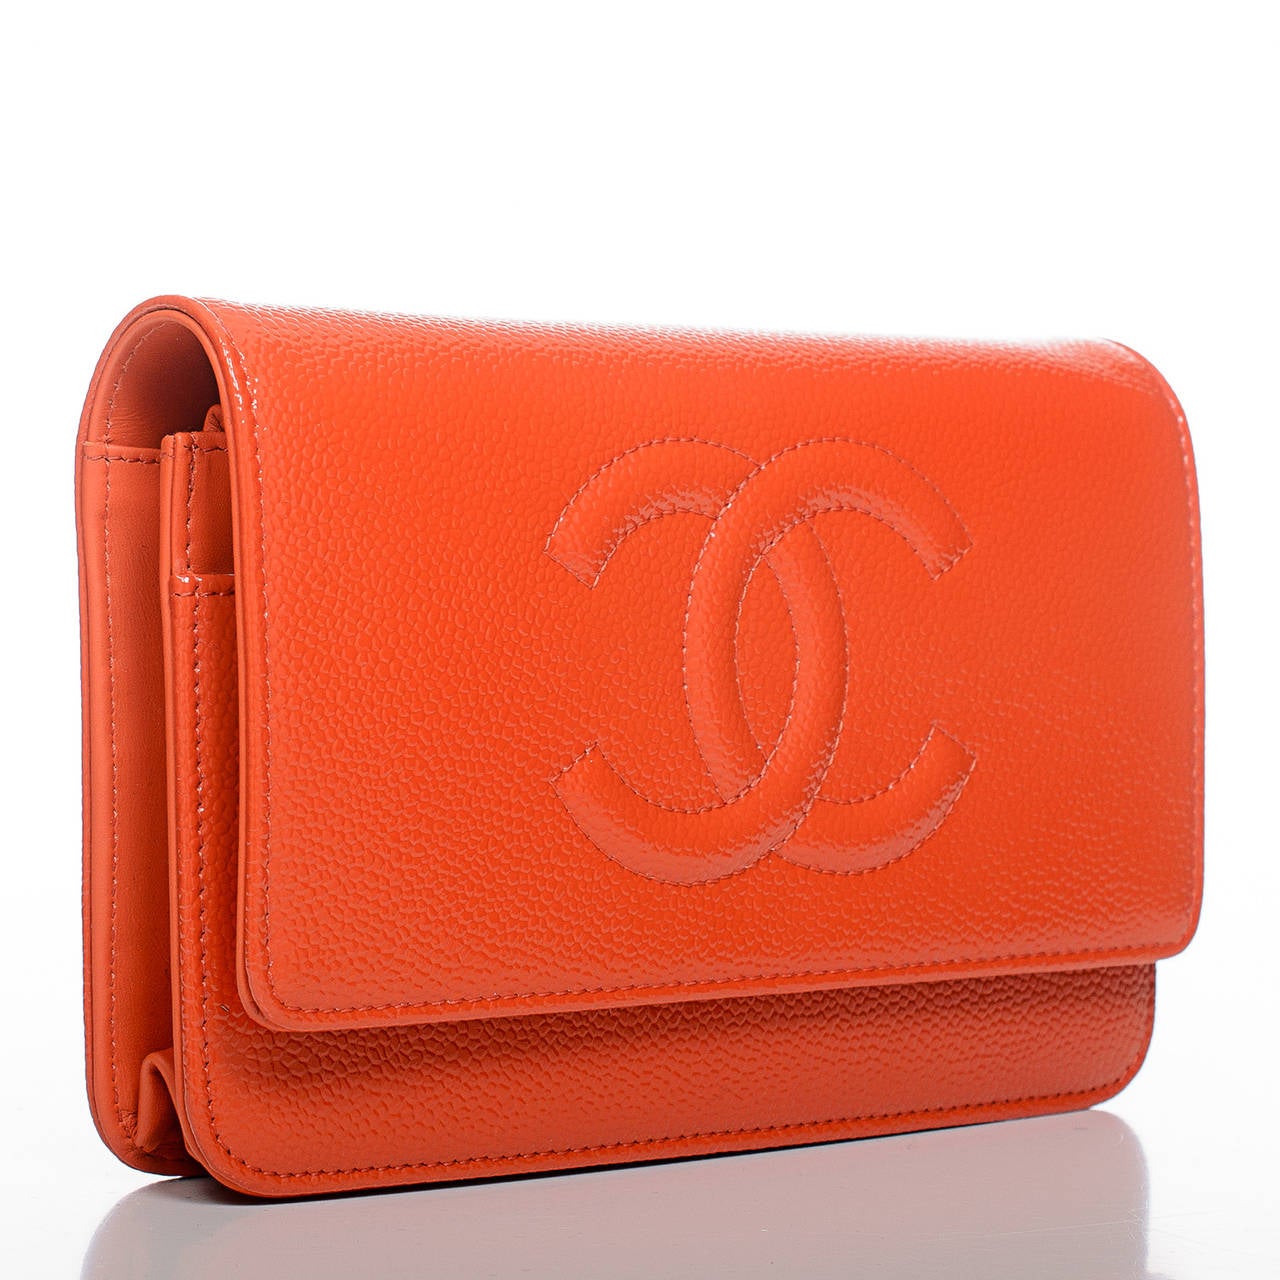 Chanel orange Timeless Wallet On Chain (WOC) of glazed caviar leather with ruthenium hardware

The Wallet On Chain (WOC) is one of the desired Chanel accessory. Its great styling, versatility and attractive price point makes it a must for new and